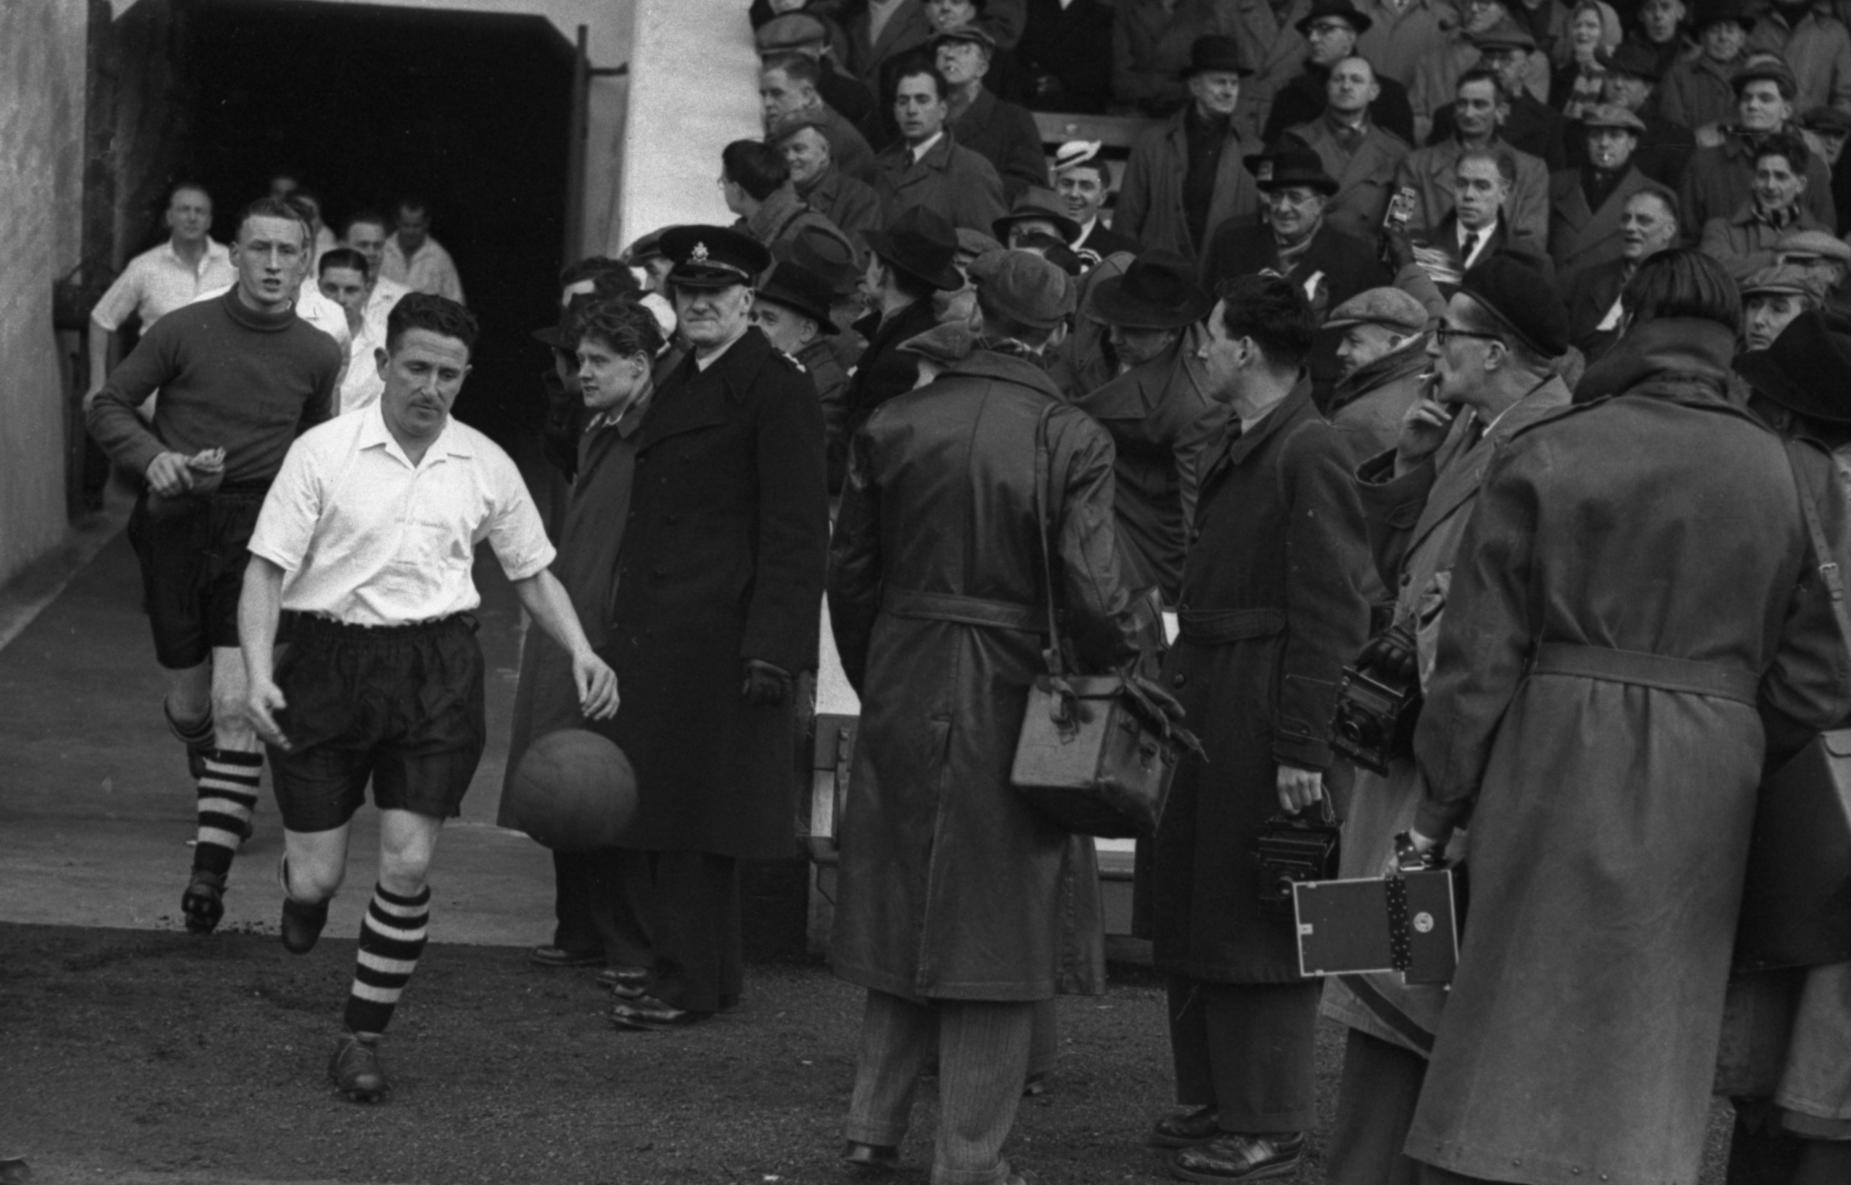 Bud Aherne leads the team out